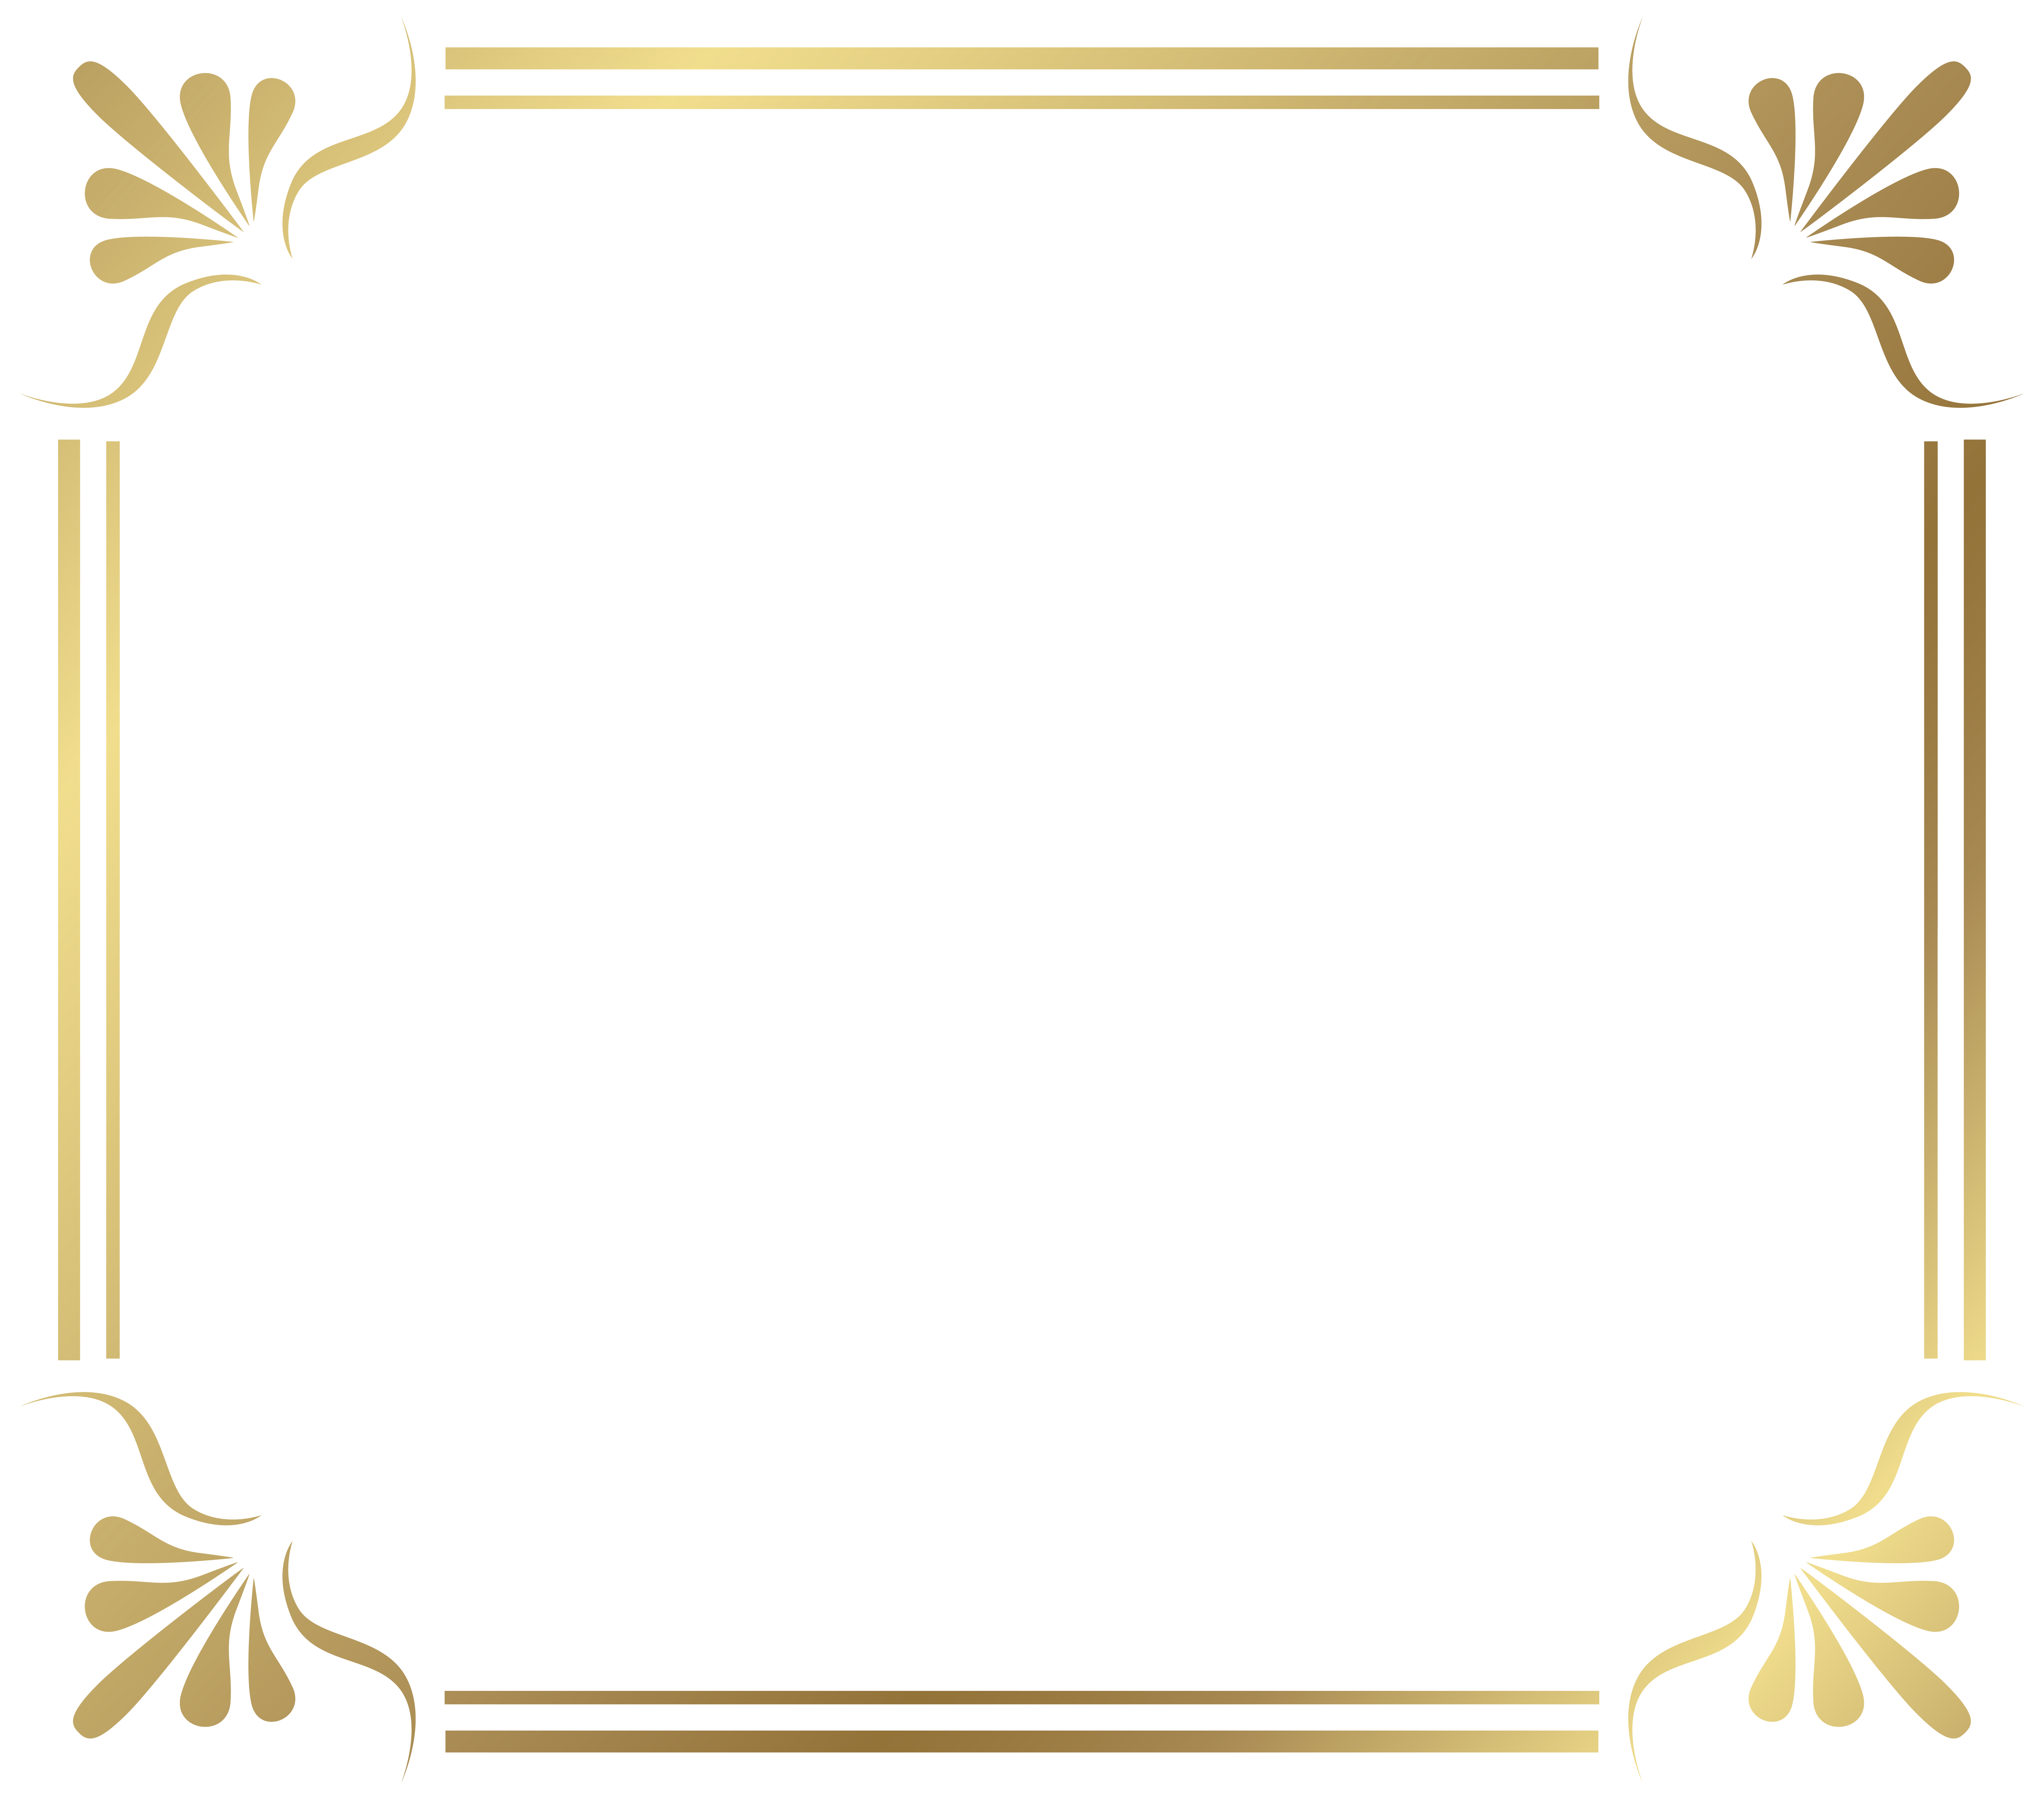 Picture Frame Border HD Image Free PNG Clipart